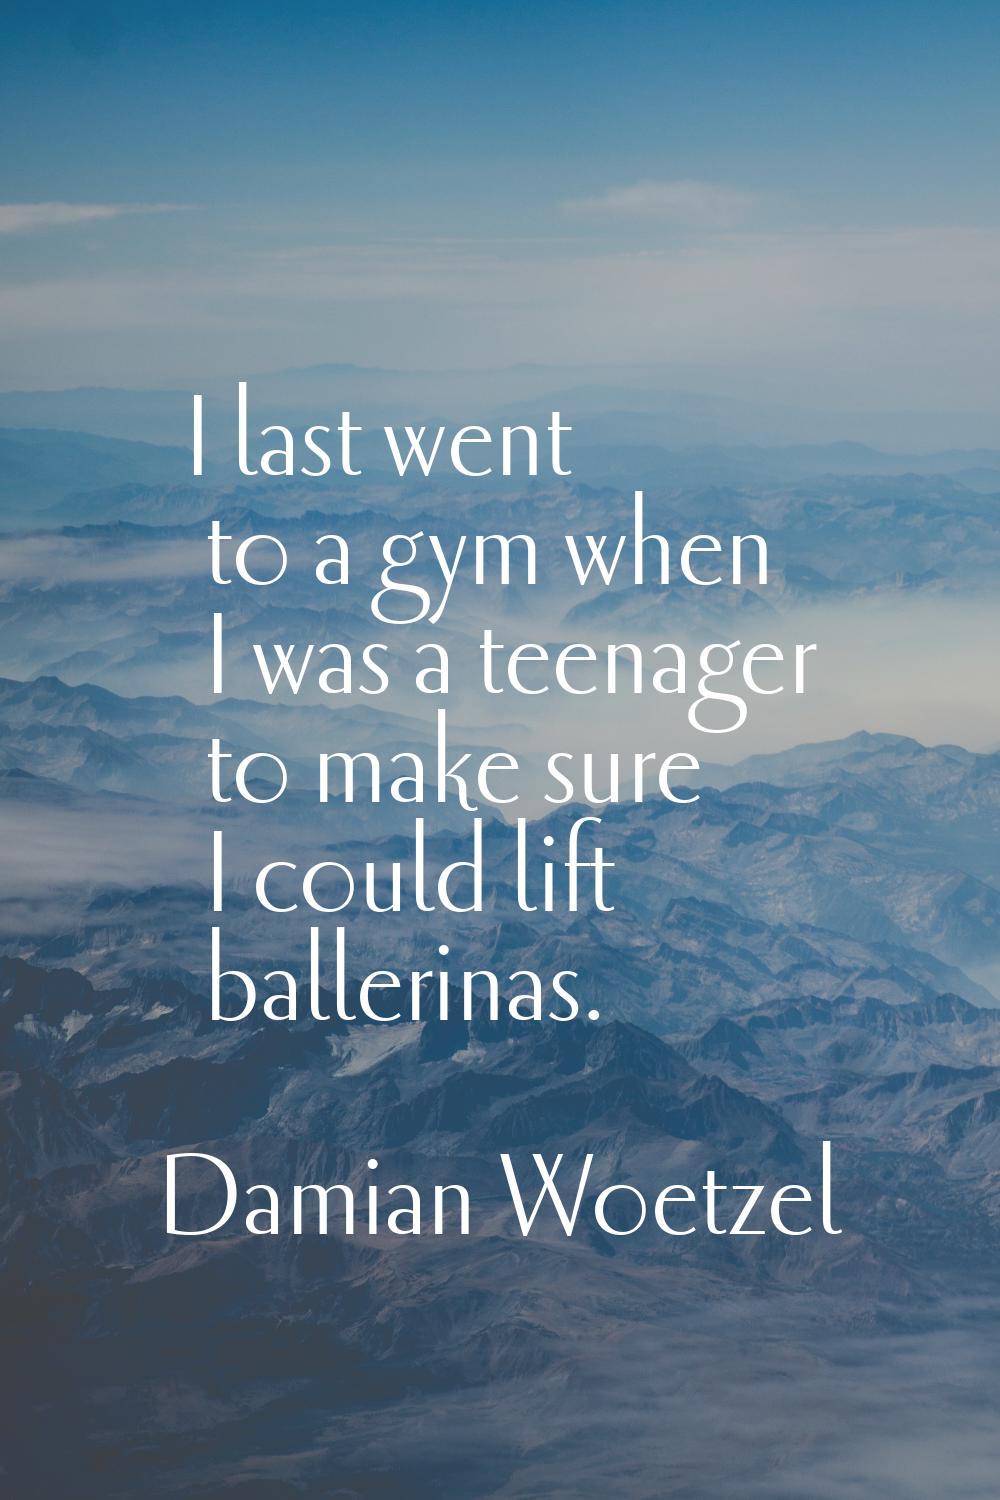 I last went to a gym when I was a teenager to make sure I could lift ballerinas.